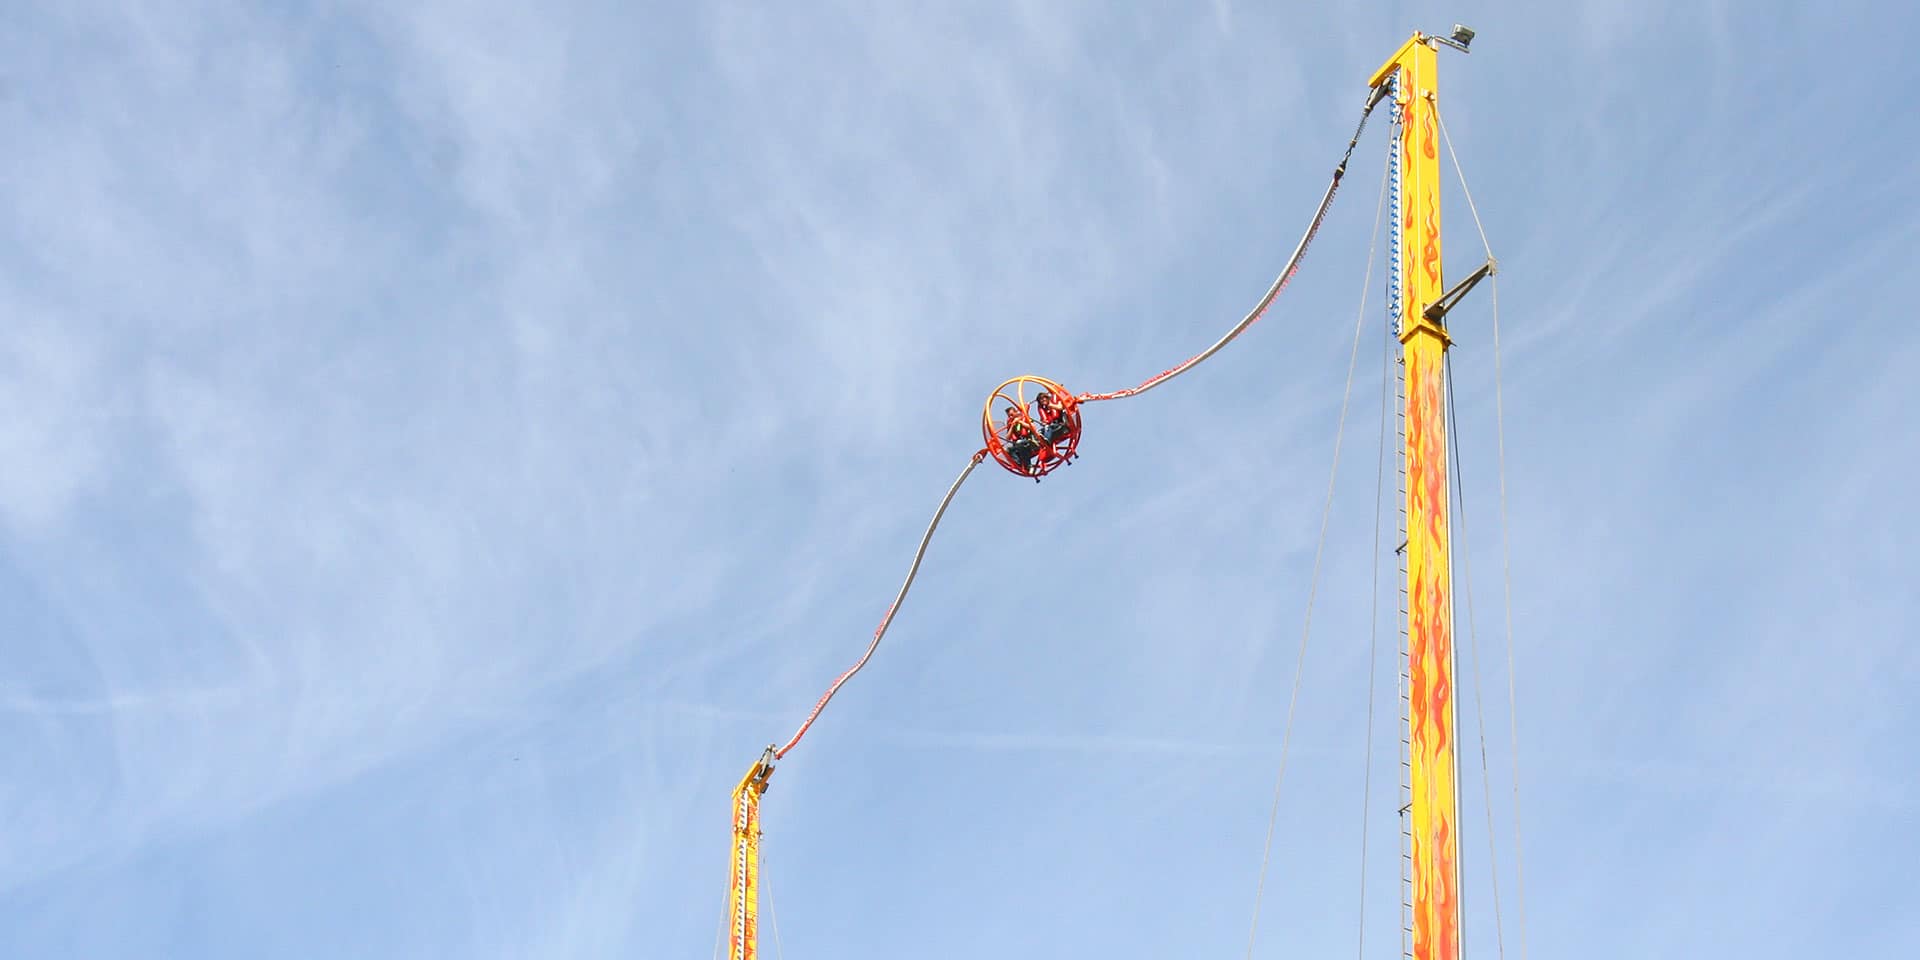 bungee cord vancouver